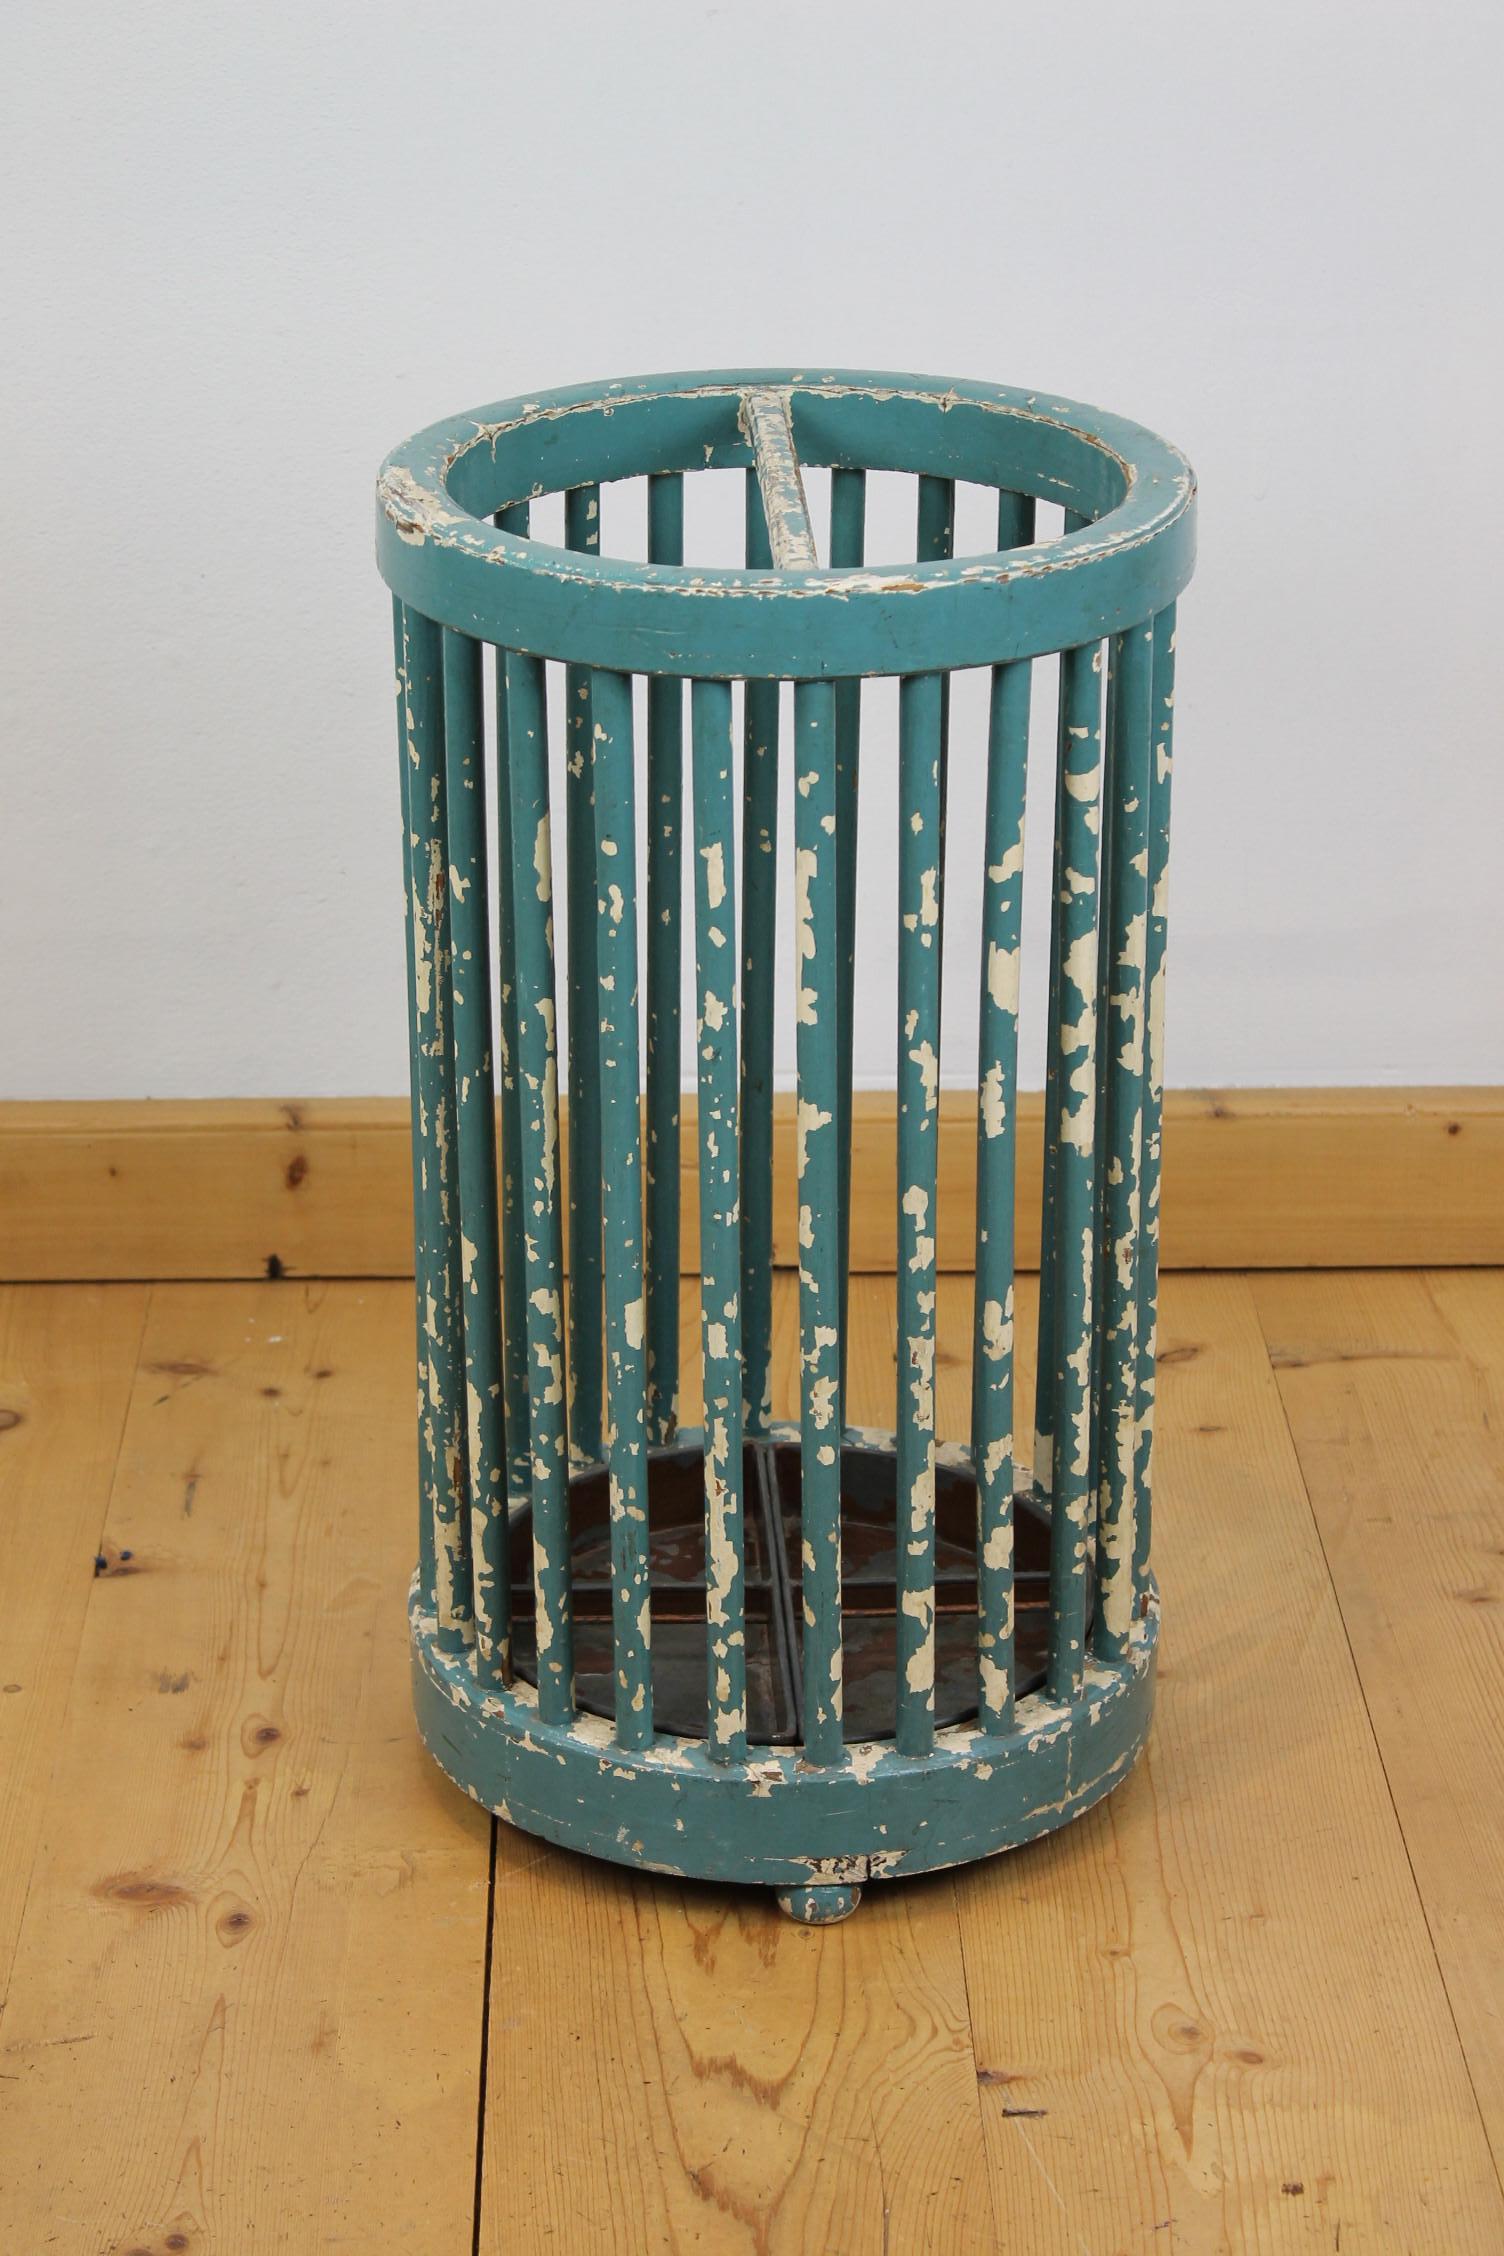 Wooden umbrella stand with a great worn patina. 
This large round umbrella stand has the color turquoise green and could also be used to storage roll-up charts or maps. 
It it made of painted wood with bars all around and 2 zinc plates under for